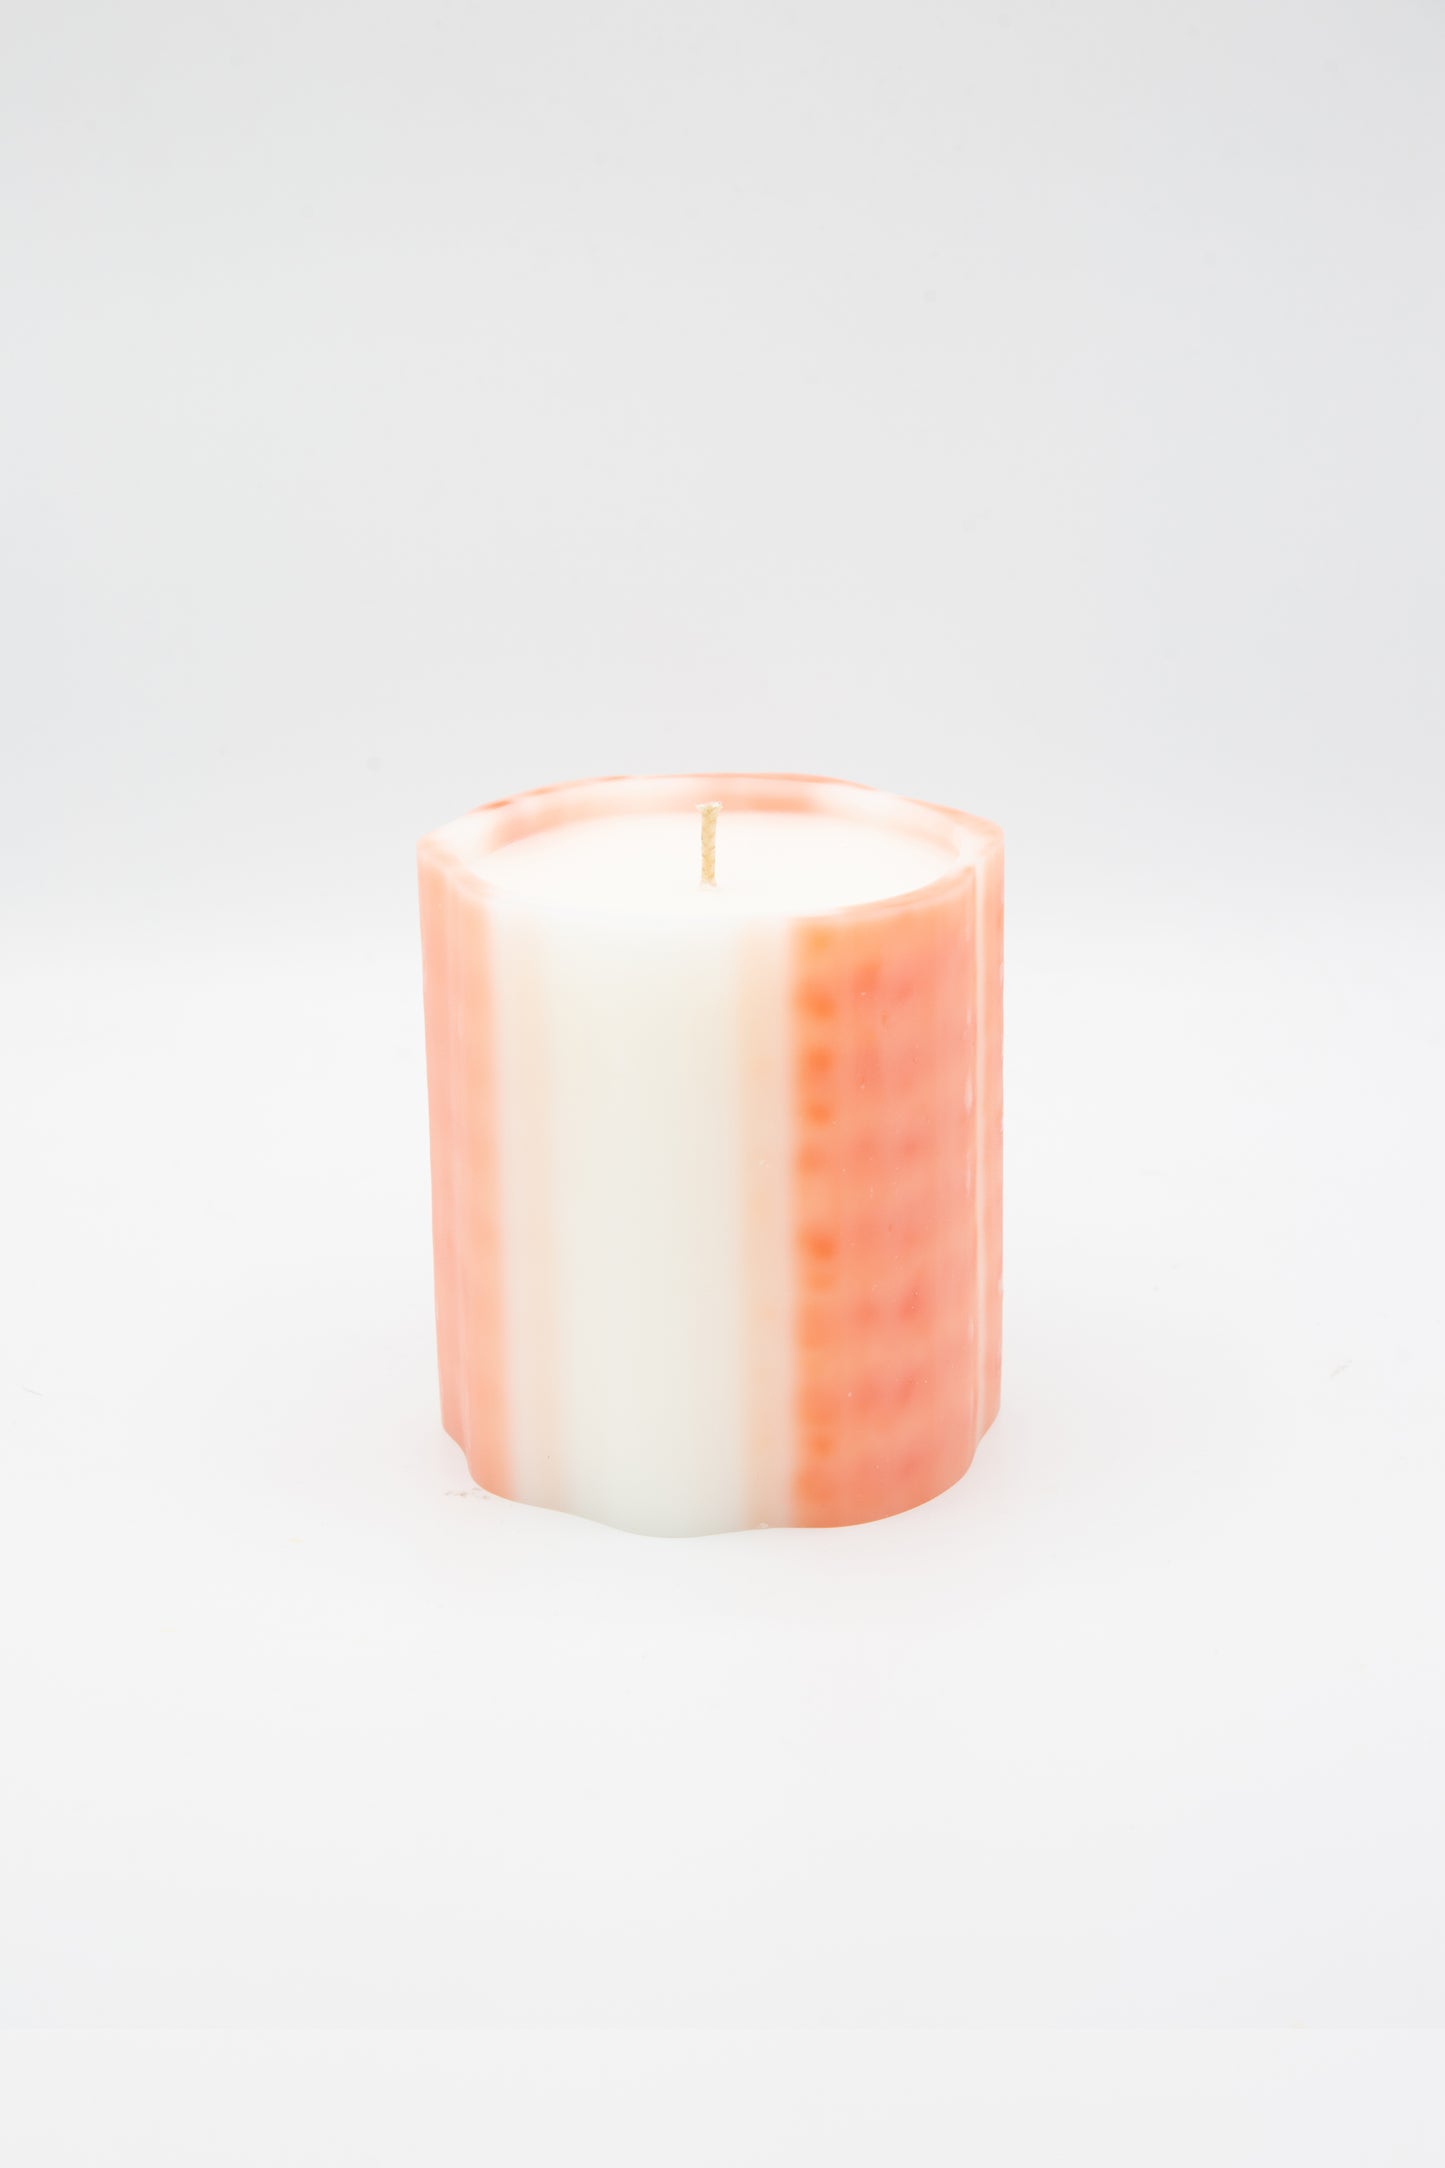 An Artisanal Candle in Neroli scent by Le Feu De L'eau. Candle is in a pink and white stripes wax vessel.